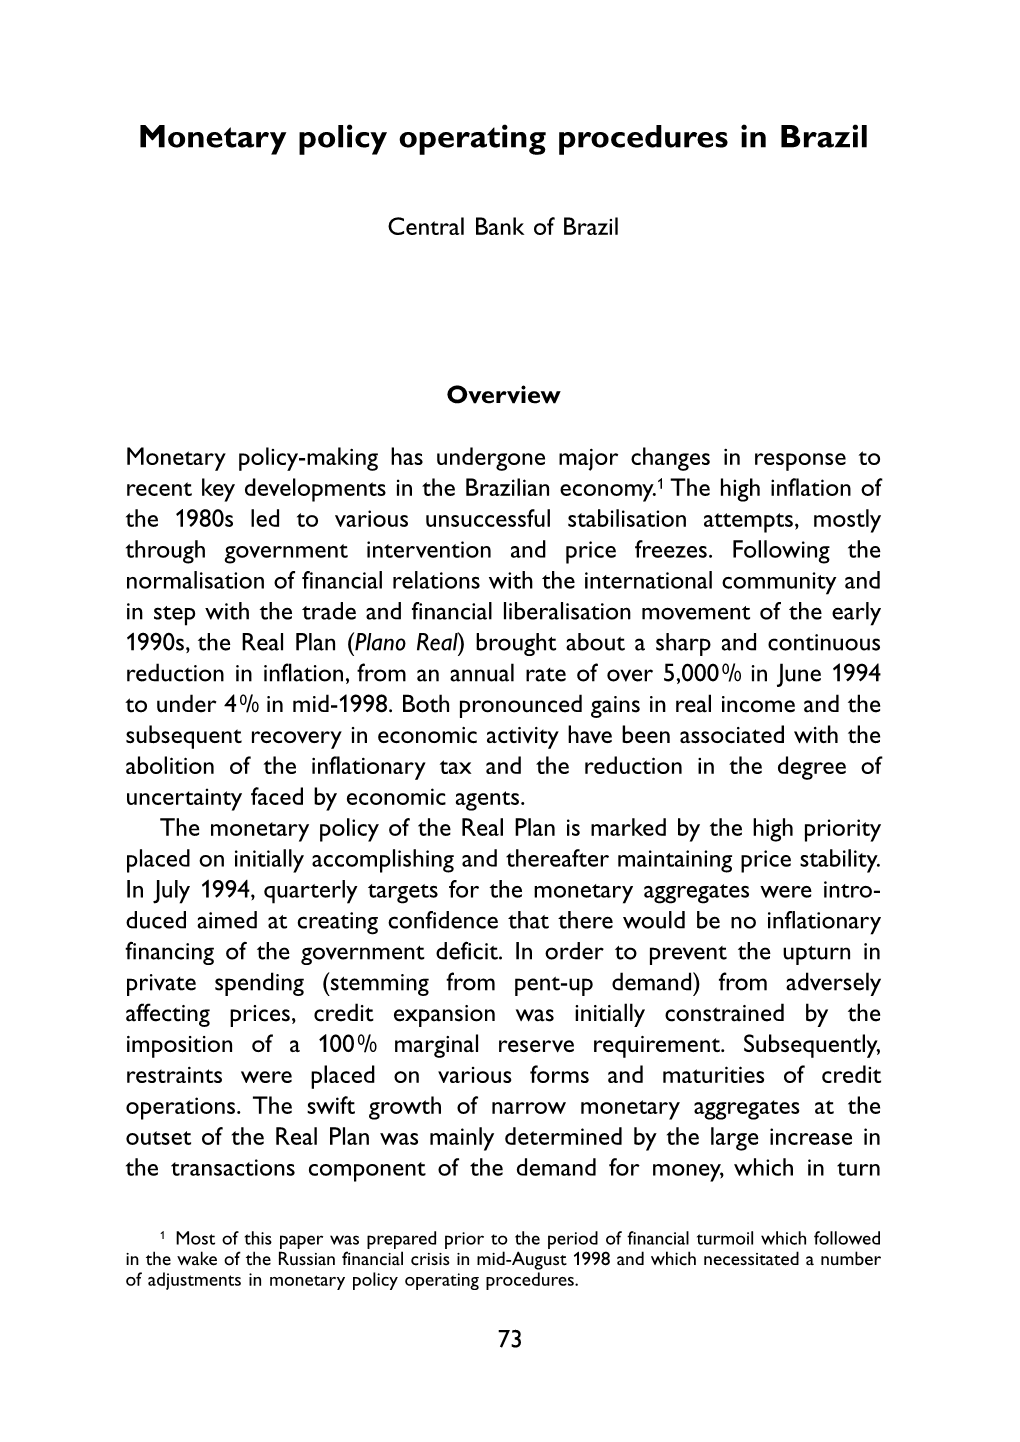 Monetary Policy Operating Procedures in Brazil